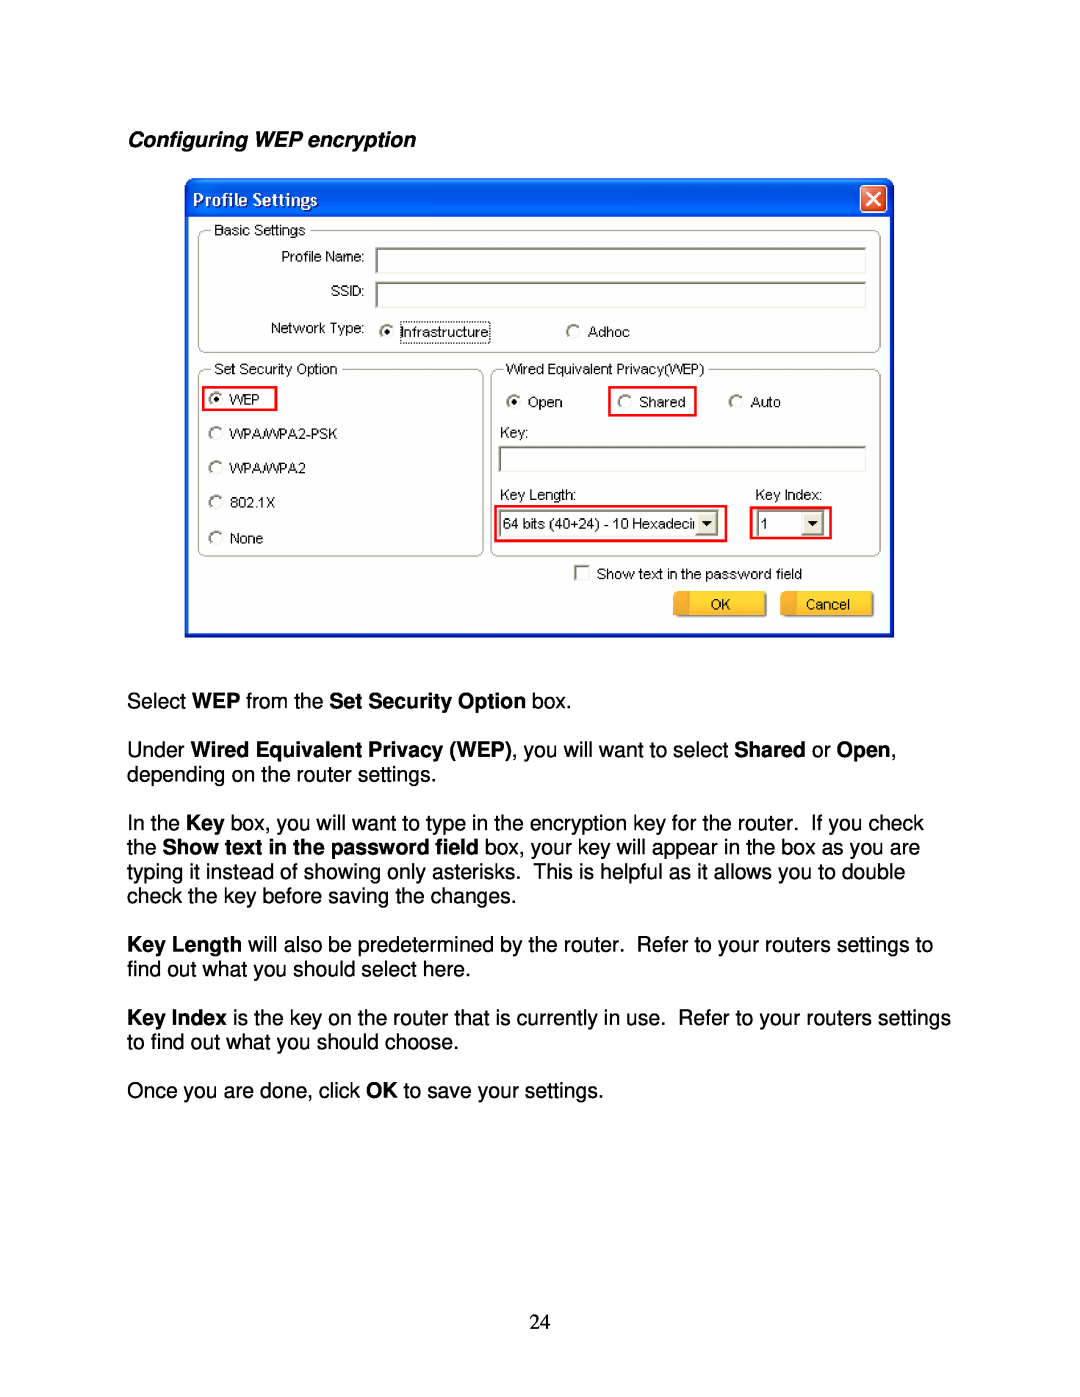 Airlink101 AWLH6070 user manual Configuring WEP encryption, Select WEP from the Set Security Option box 